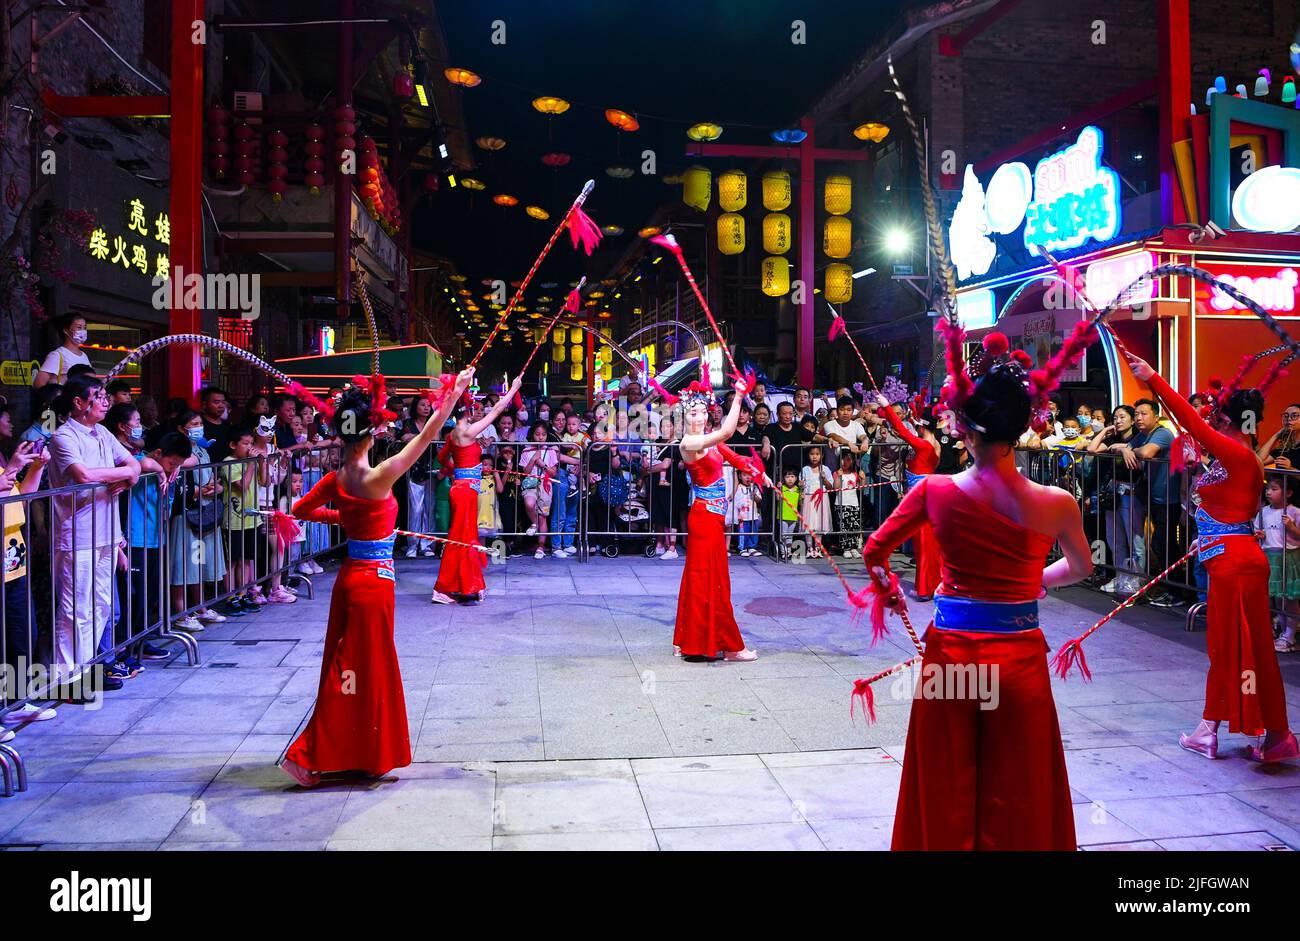 Chongqing. 1st June, 2022. People watch an art performance at a commercial street in southwest China's Chongqing Municipality, June 1, 2022. Under COVID-19 prevention and control measures, Chongqing in southwest China has striven to combine its night economy with culture and tourism in innovative ways, thus enhancing the vitality and attraction of nighttime consumption and turbocharging its development. Credit: Wang Quanchao/Xinhua/Alamy Live News Stock Photo